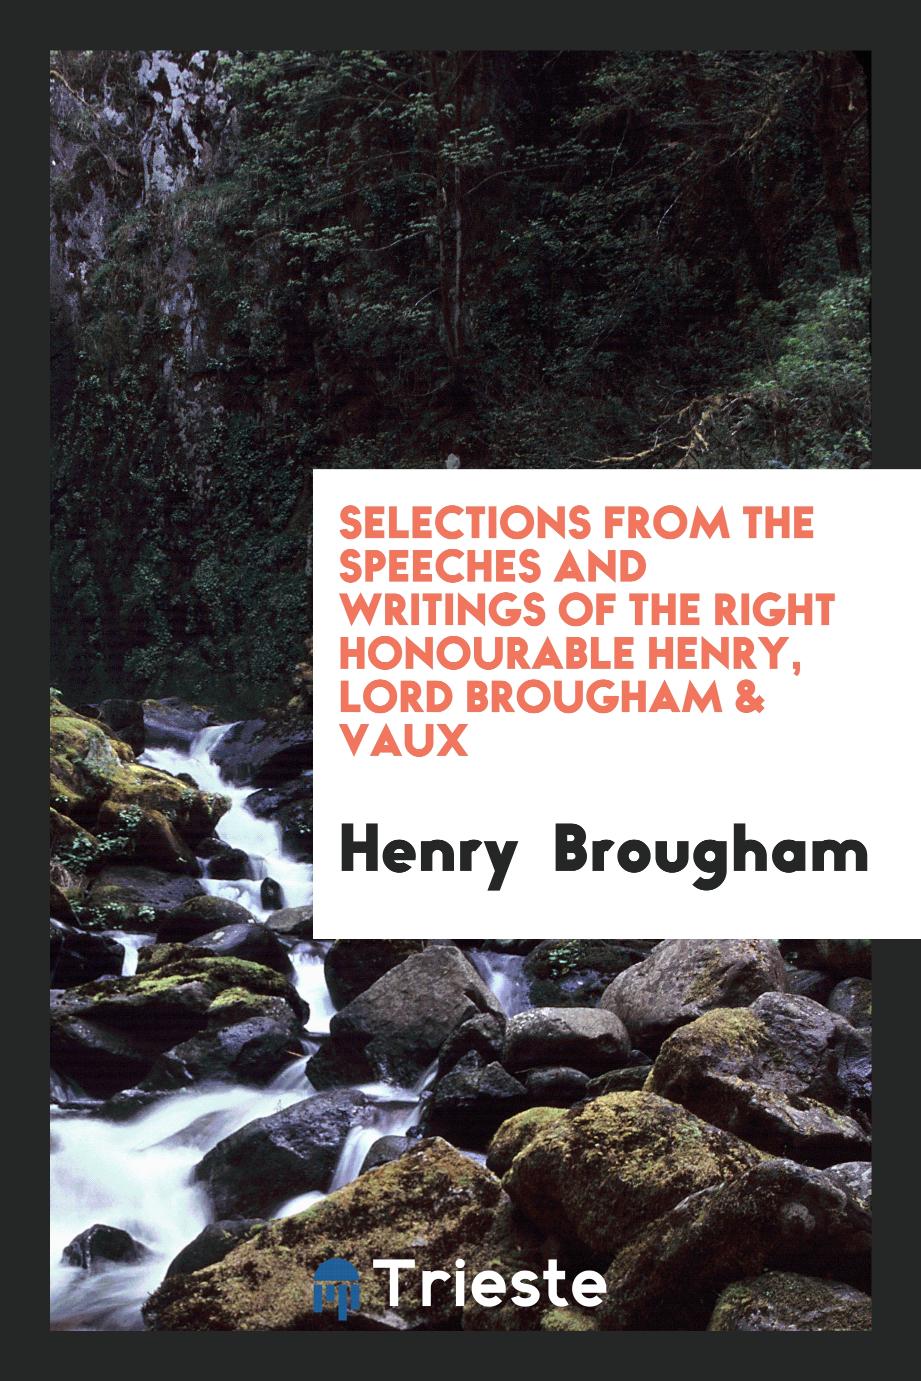 Selections from the Speeches and Writings of the Right Honourable Henry, Lord Brougham & Vaux